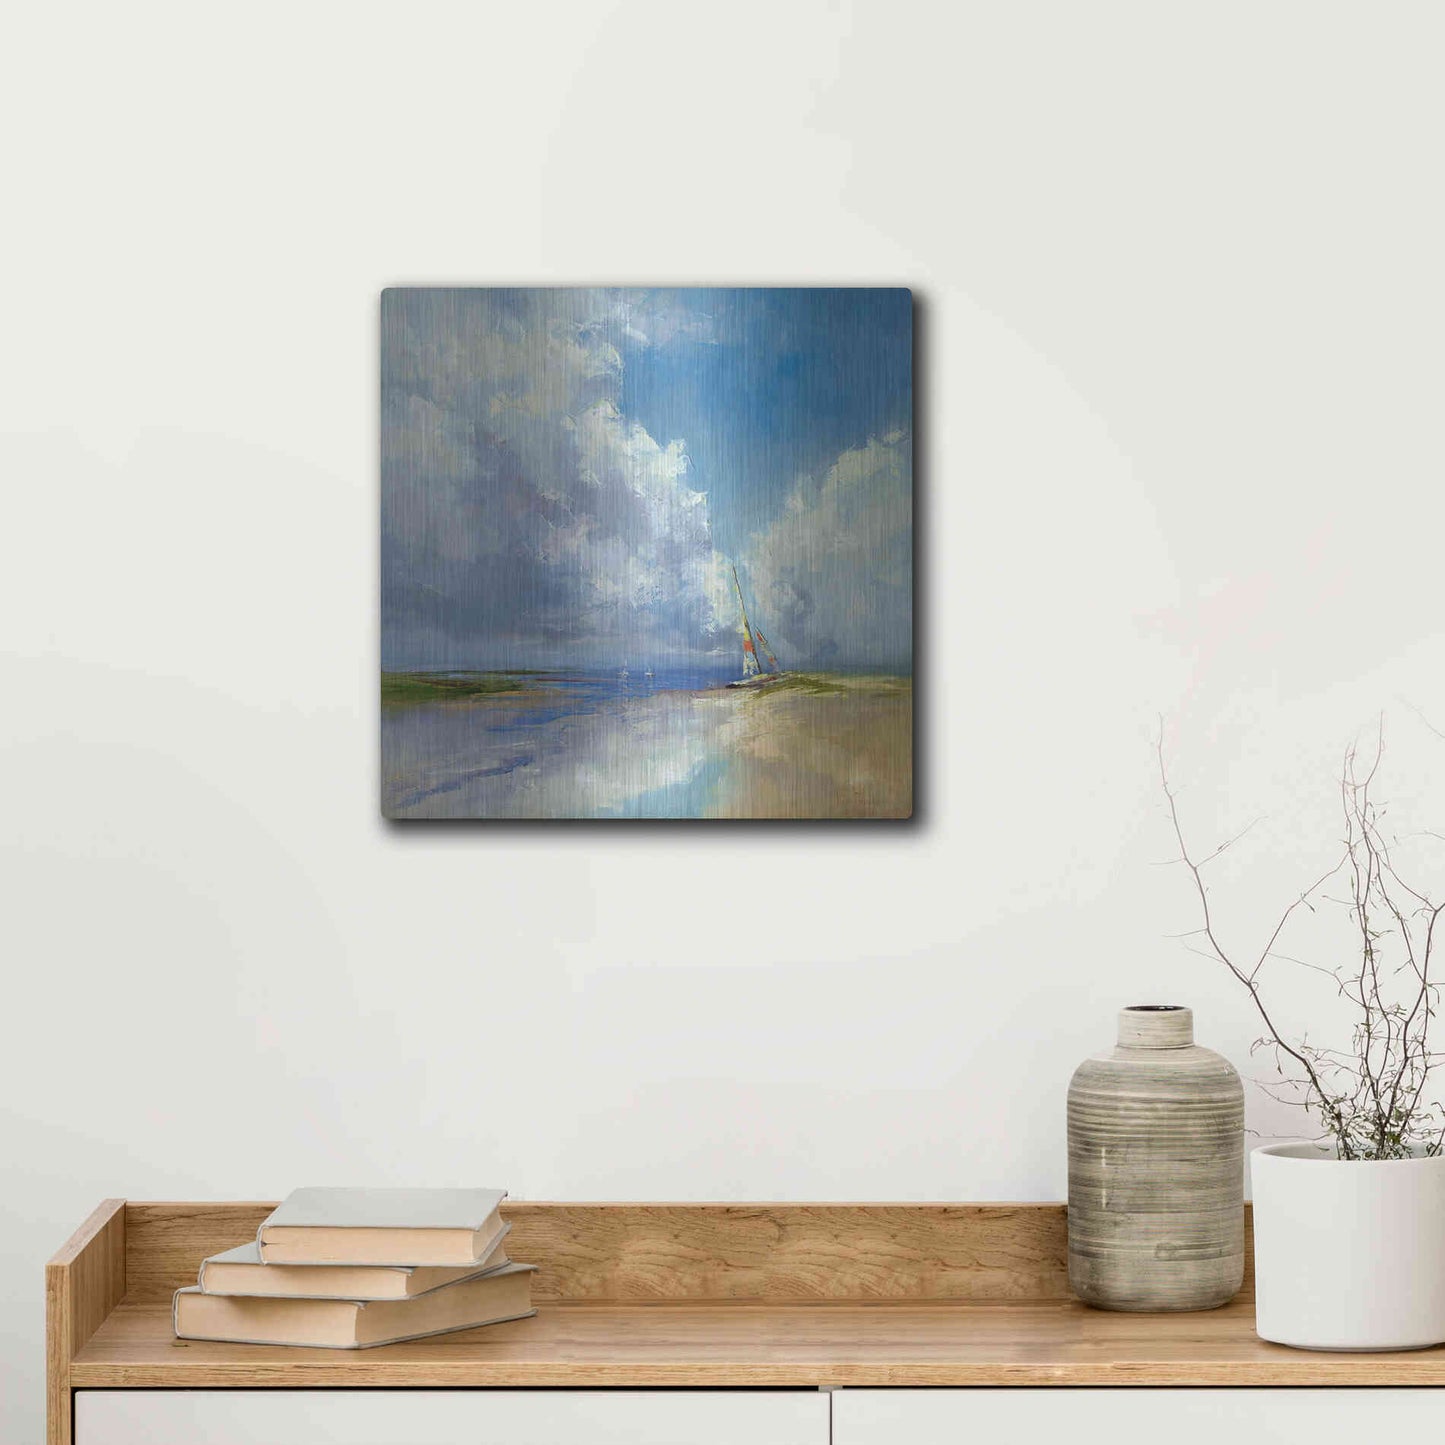 Luxe Metal Art 'Sailboat on a Sandy Beach' by Kasia Bruniany Metal Wall Art,12x12